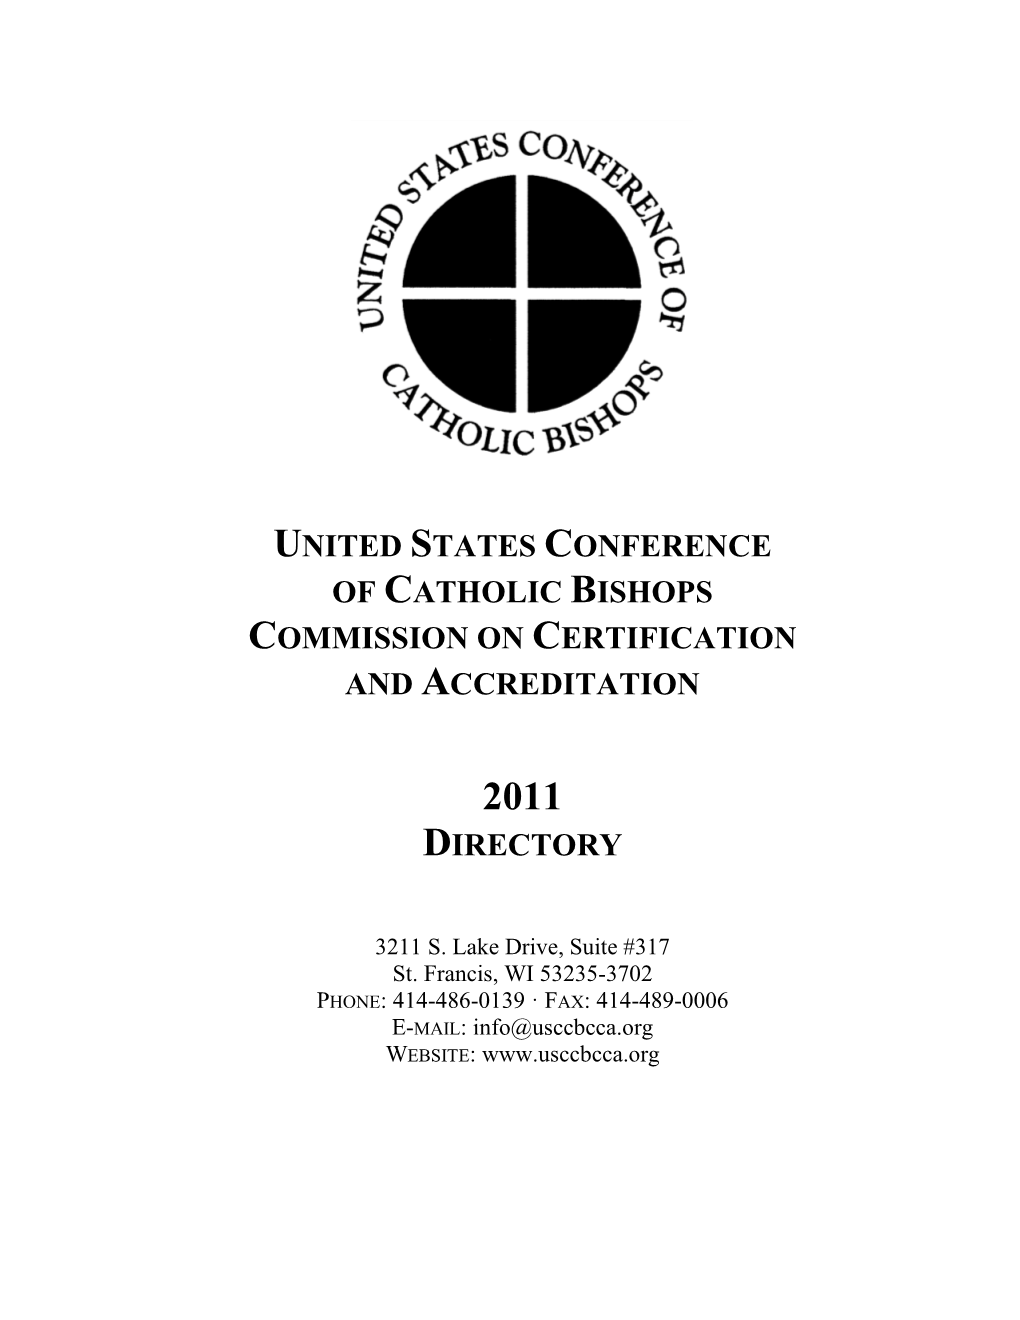 United States Conference of Catholic Bishops Commission on Certification and Accreditation